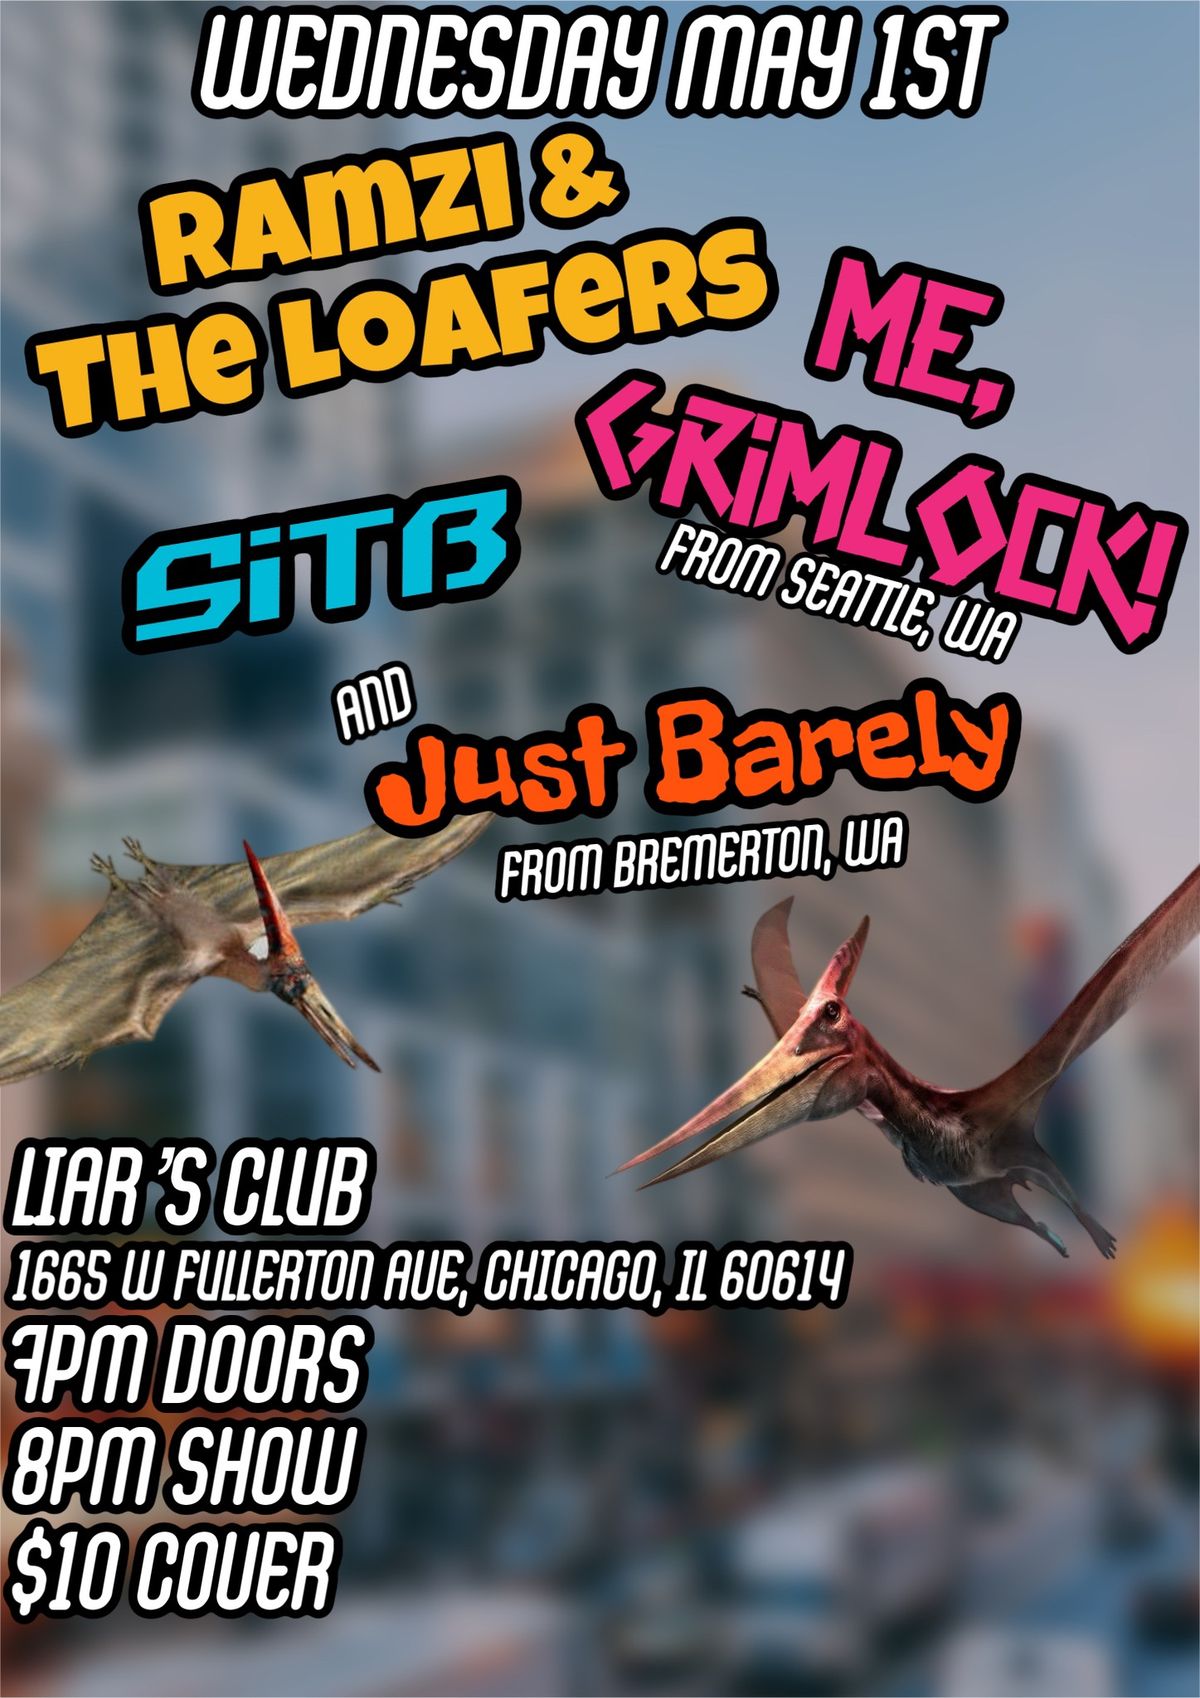 RAMZI & THE LOAFERS \/\/ ME, GRIMLOCK! \/\/ SITB \/\/ JUST BARELY at Liar\u2019s Club